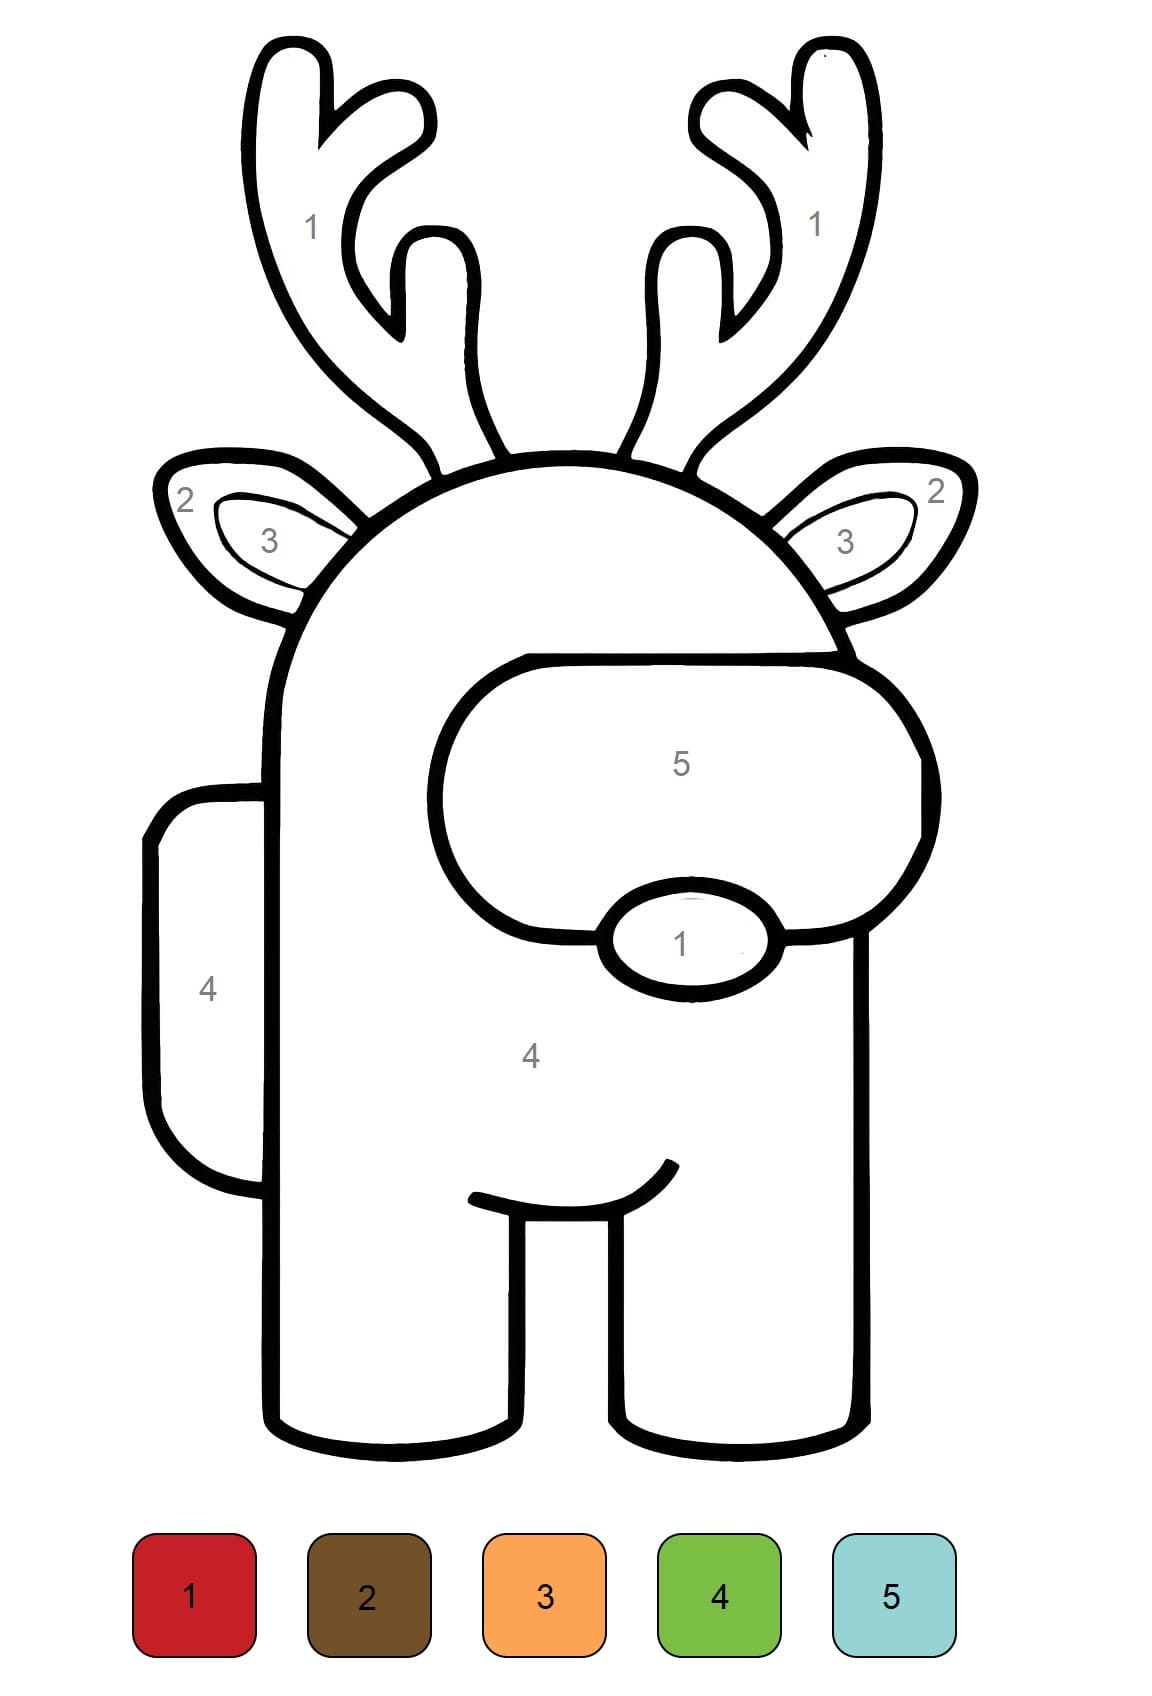 reindeer-among-us-color-by-number-coloring-page-download-print-or